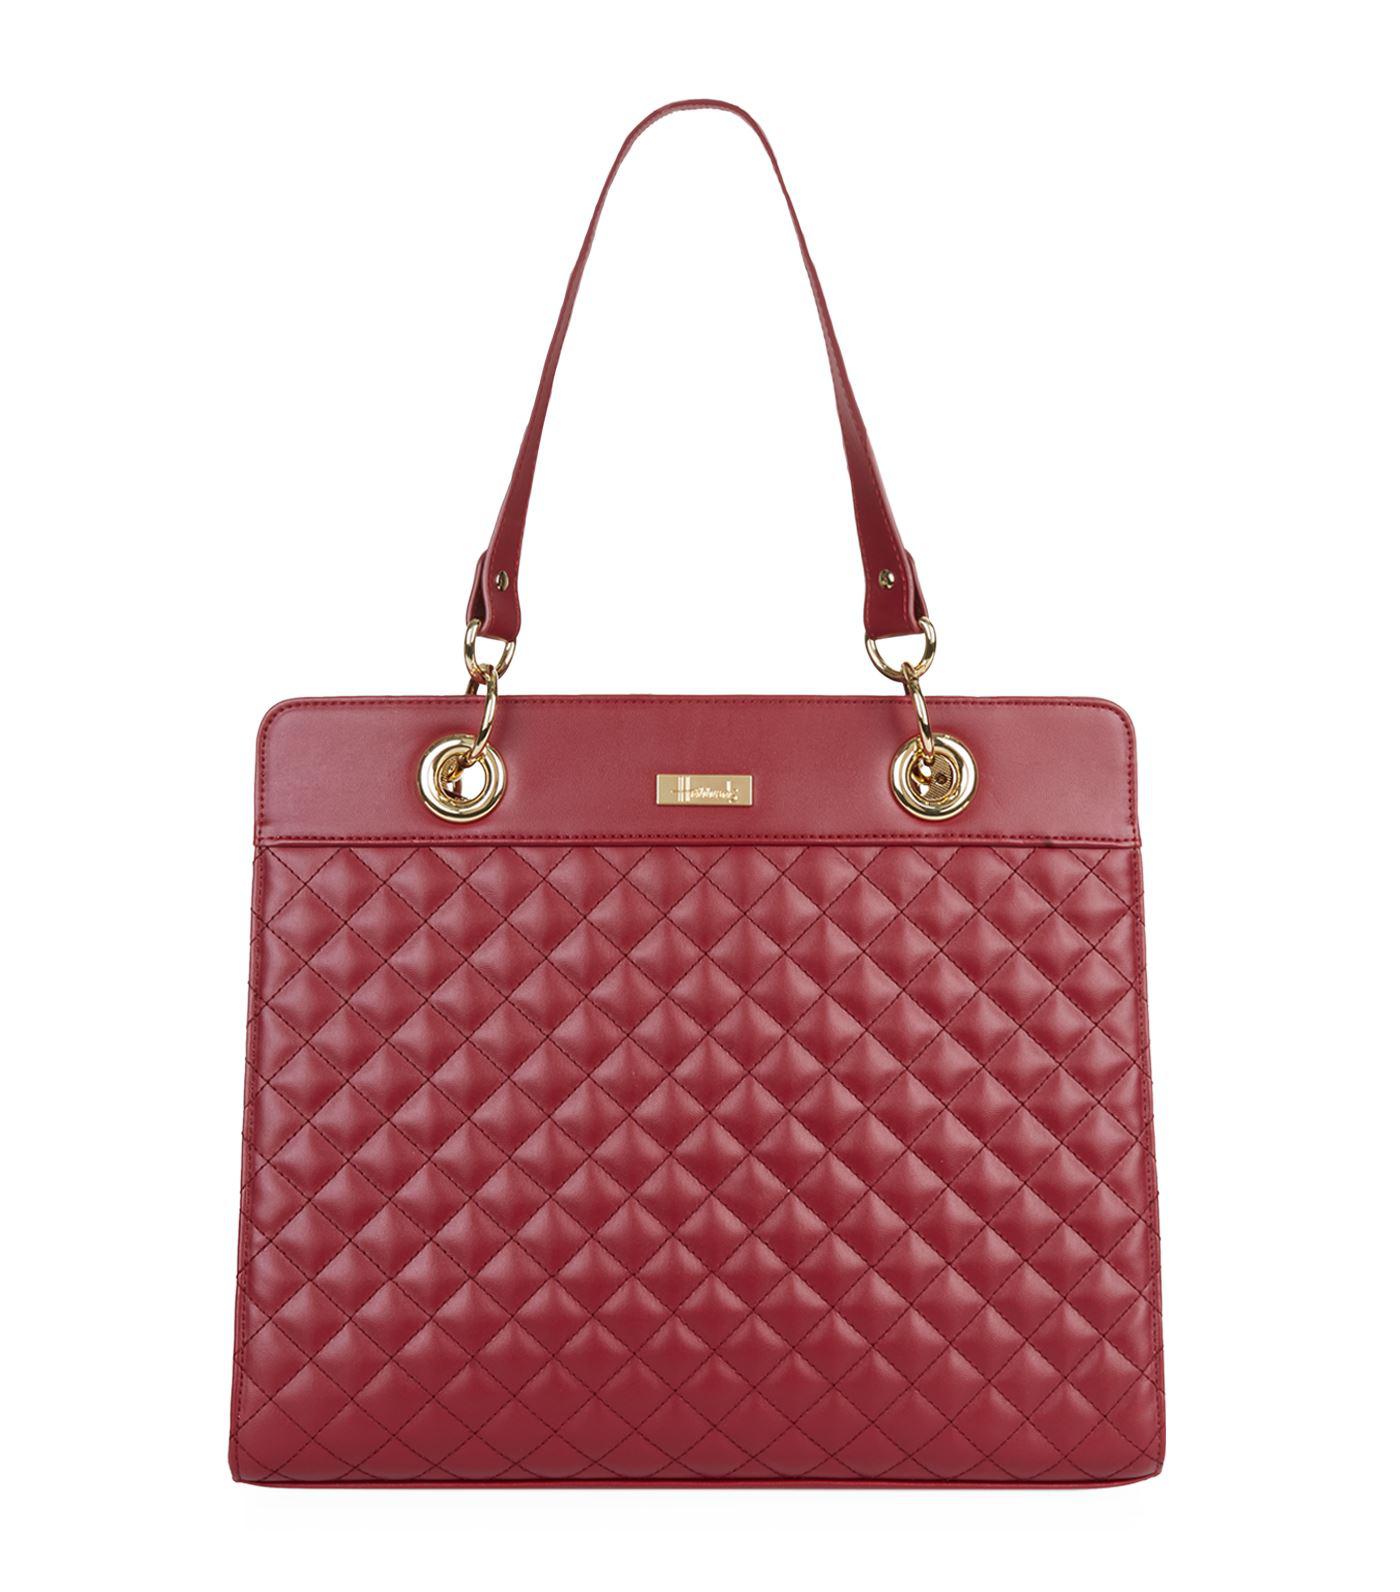 Harrods Clovelly Tote Bag in Red - Lyst